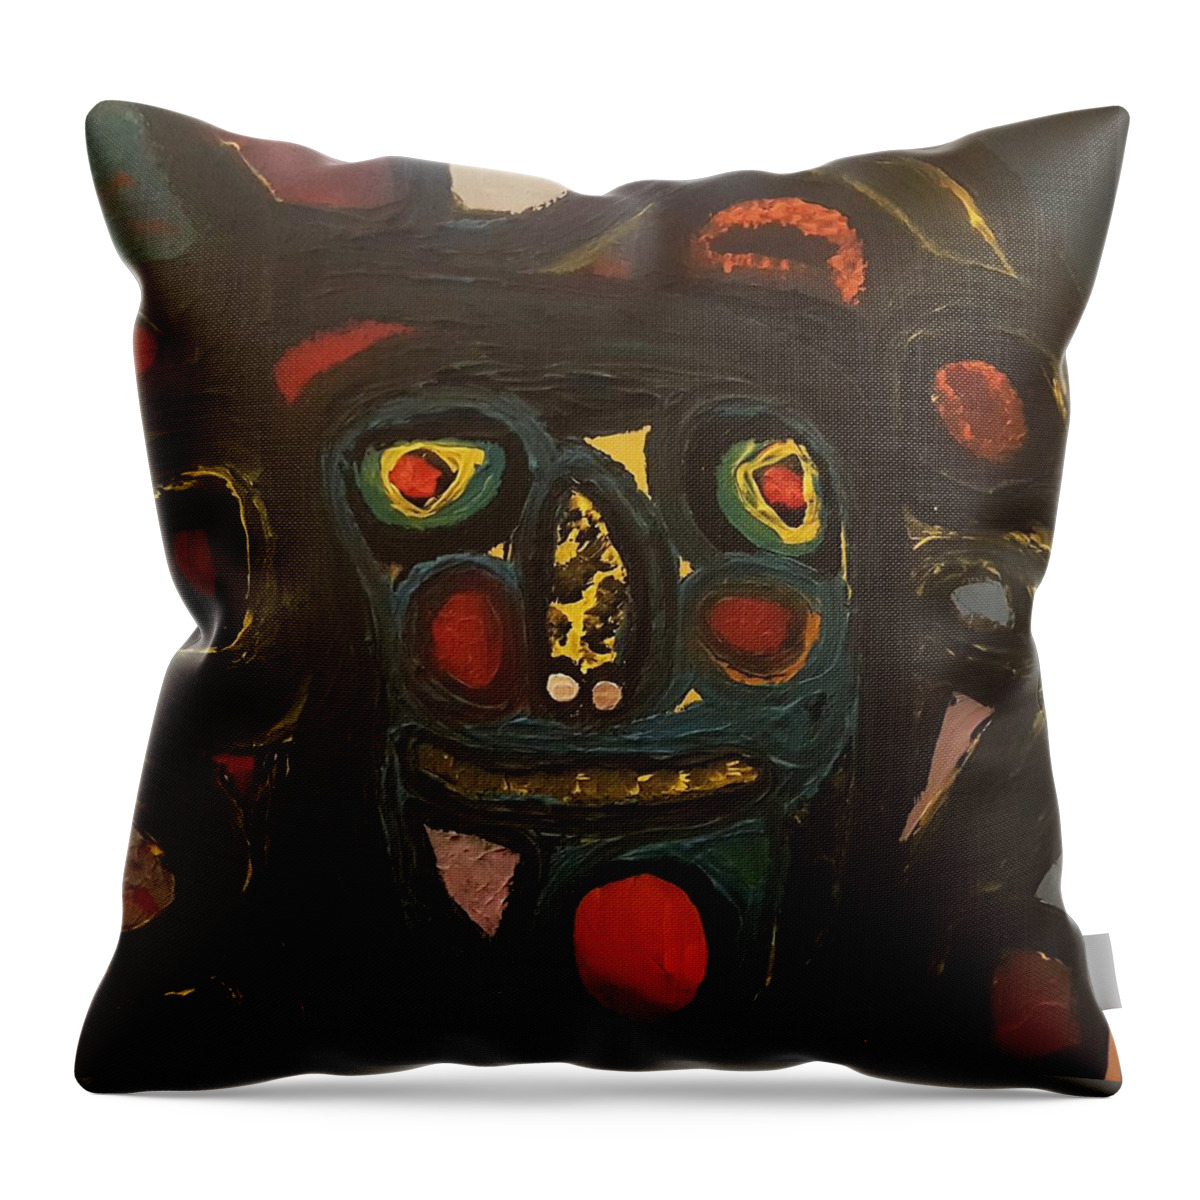 Multicultural Nfprsa Product Review Reviews Marco Social Media Technology Websites \\\\in-d�lj\\\\ Darrell Black Definism Artwork Throw Pillow featuring the painting Jumbled mindset by Darrell Black